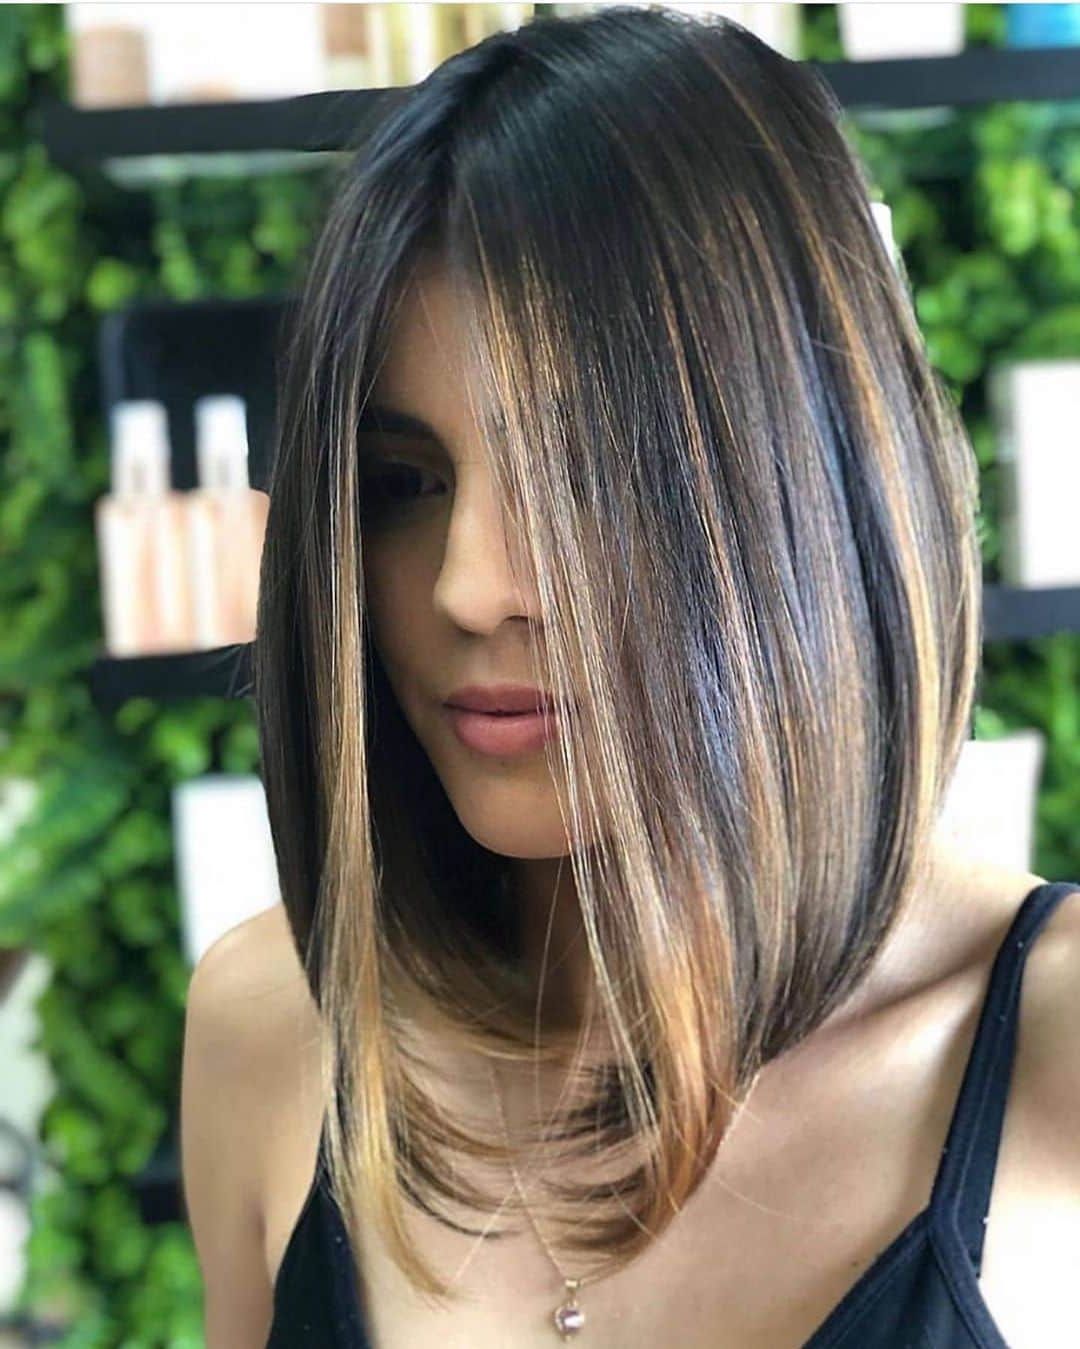 22 Stunning Long Bob Hairstyles – Stylesrant With Regard To 2018 Long Bob Haircuts With Highlights (View 5 of 25)